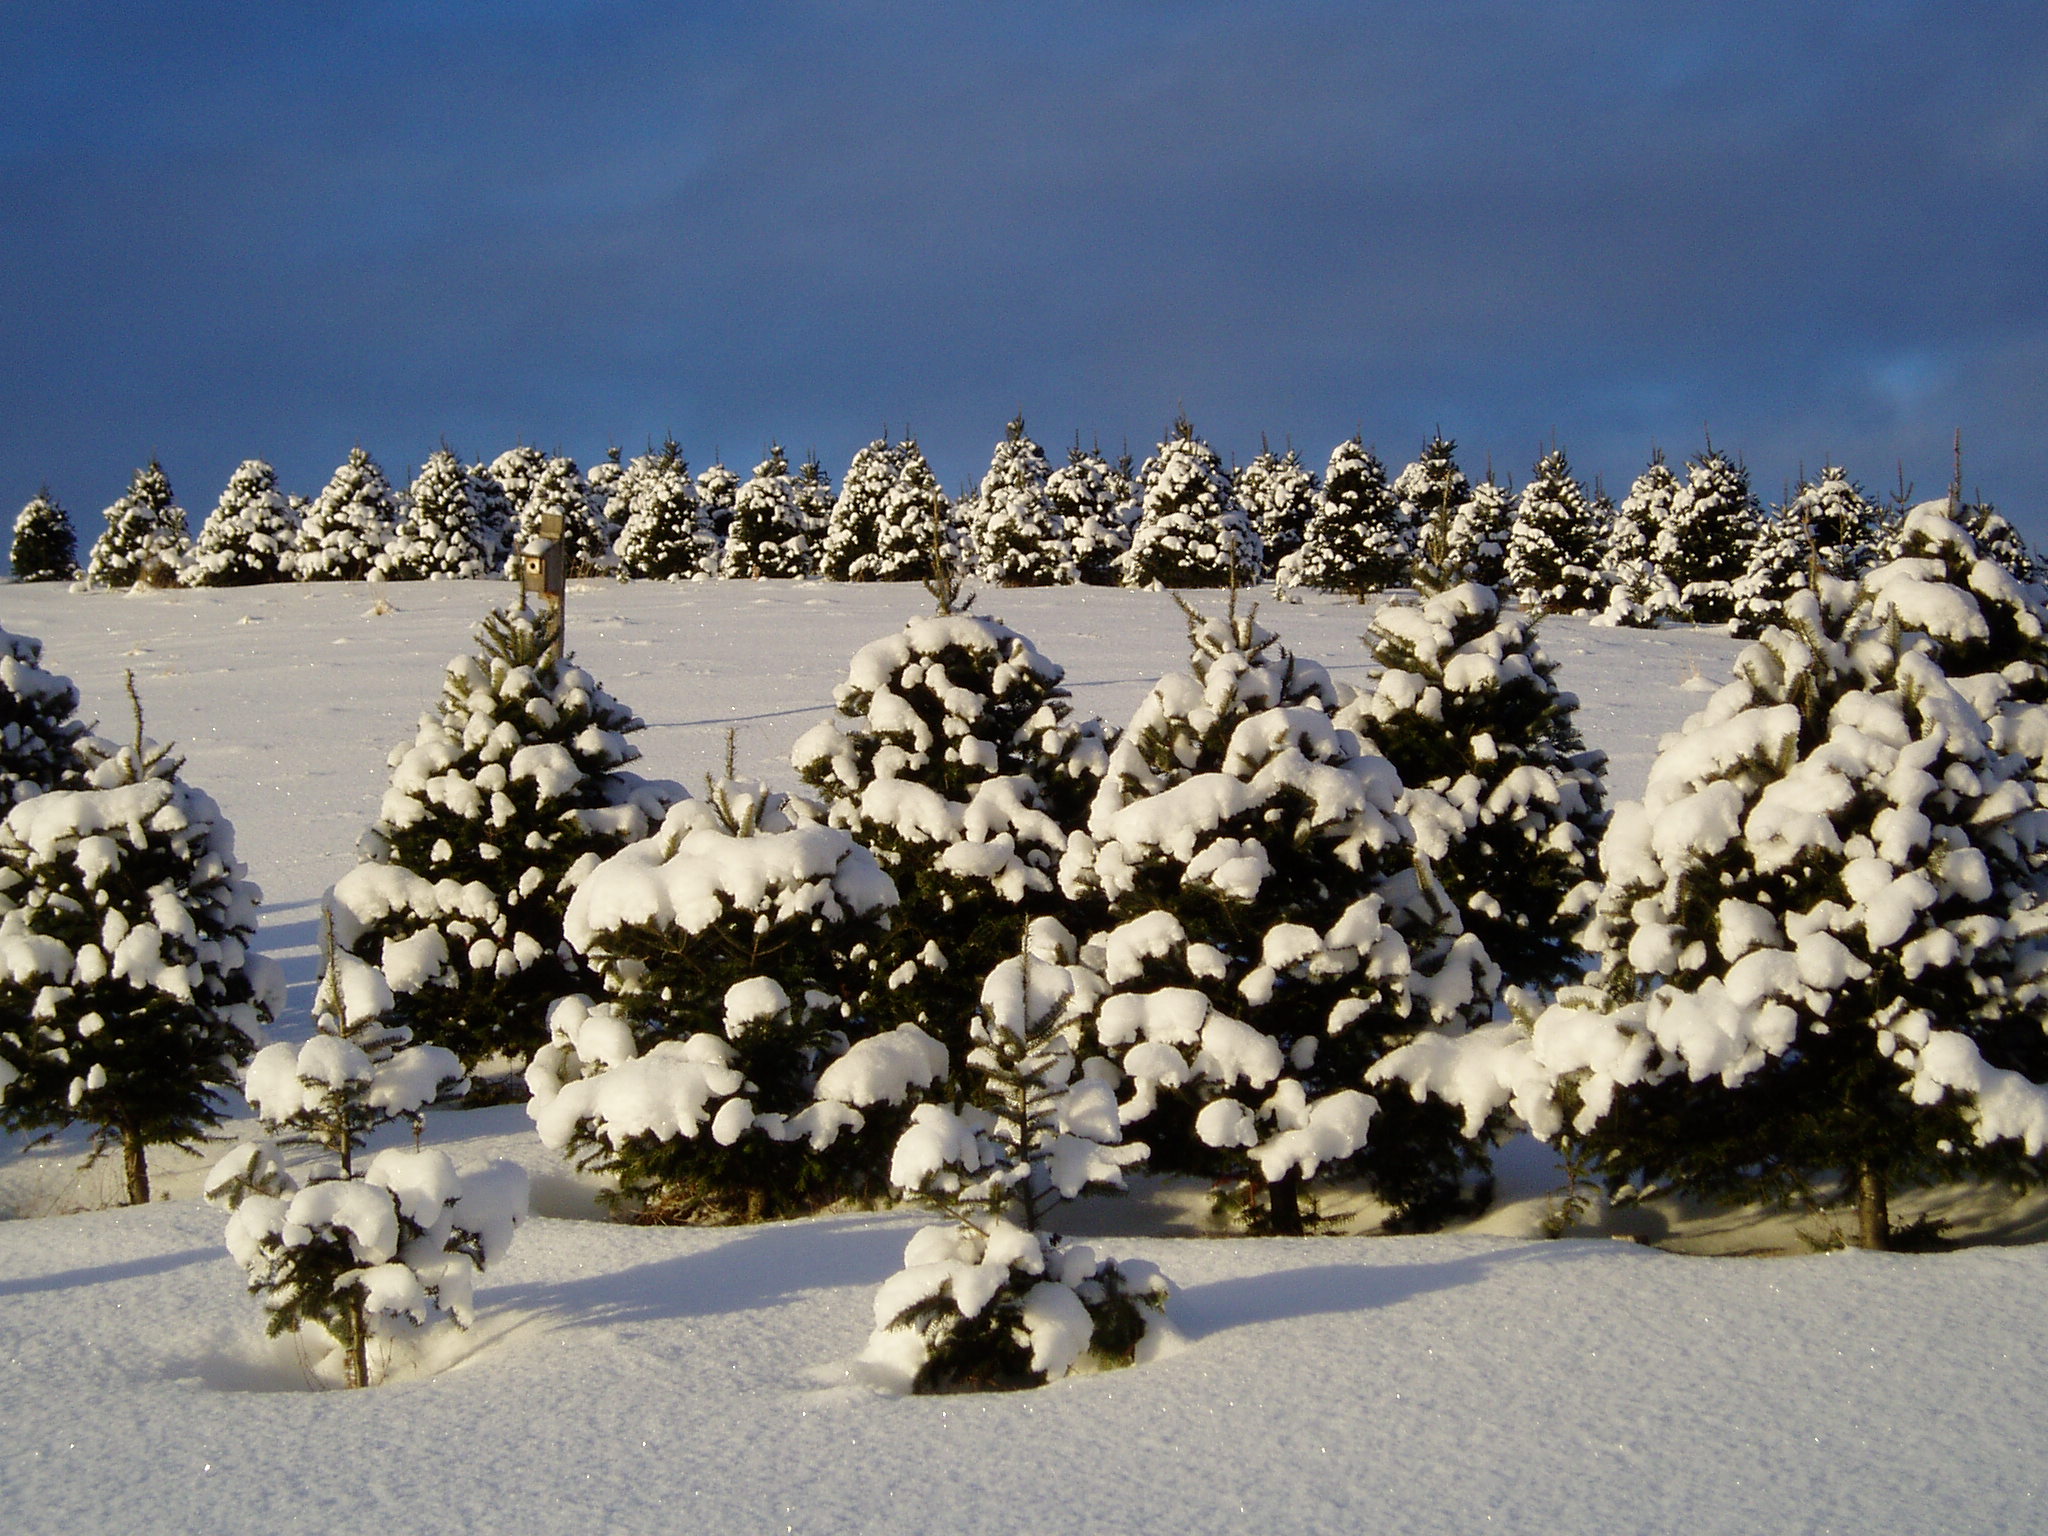 Rows of Christmas trees are covered in snow in wintertime.